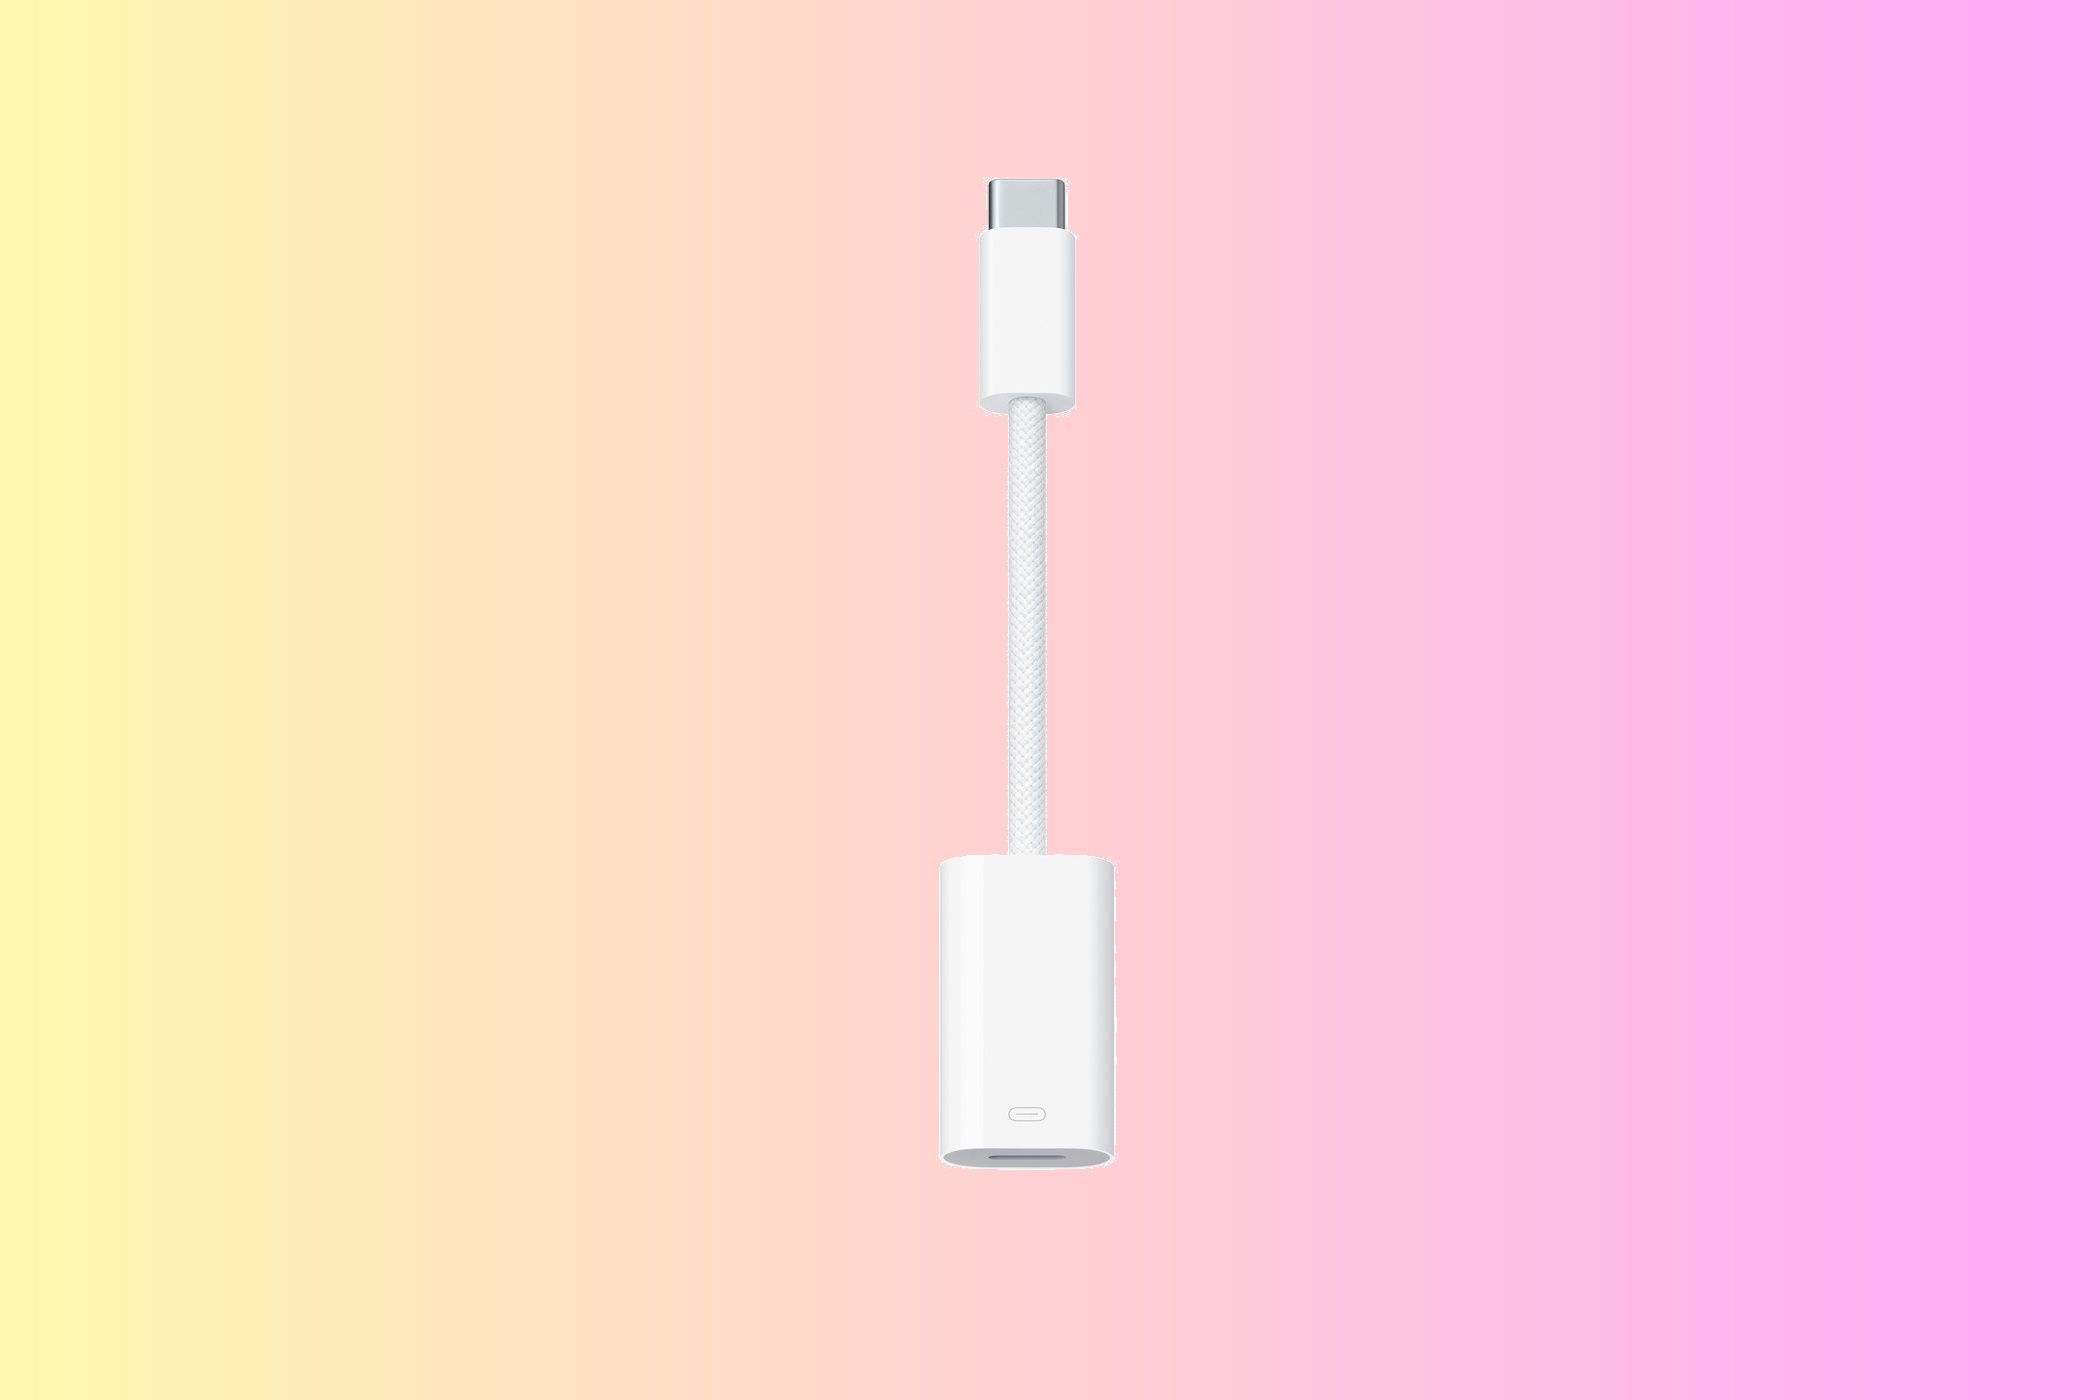 5 Of The Best Lightning To USB-C Adapters